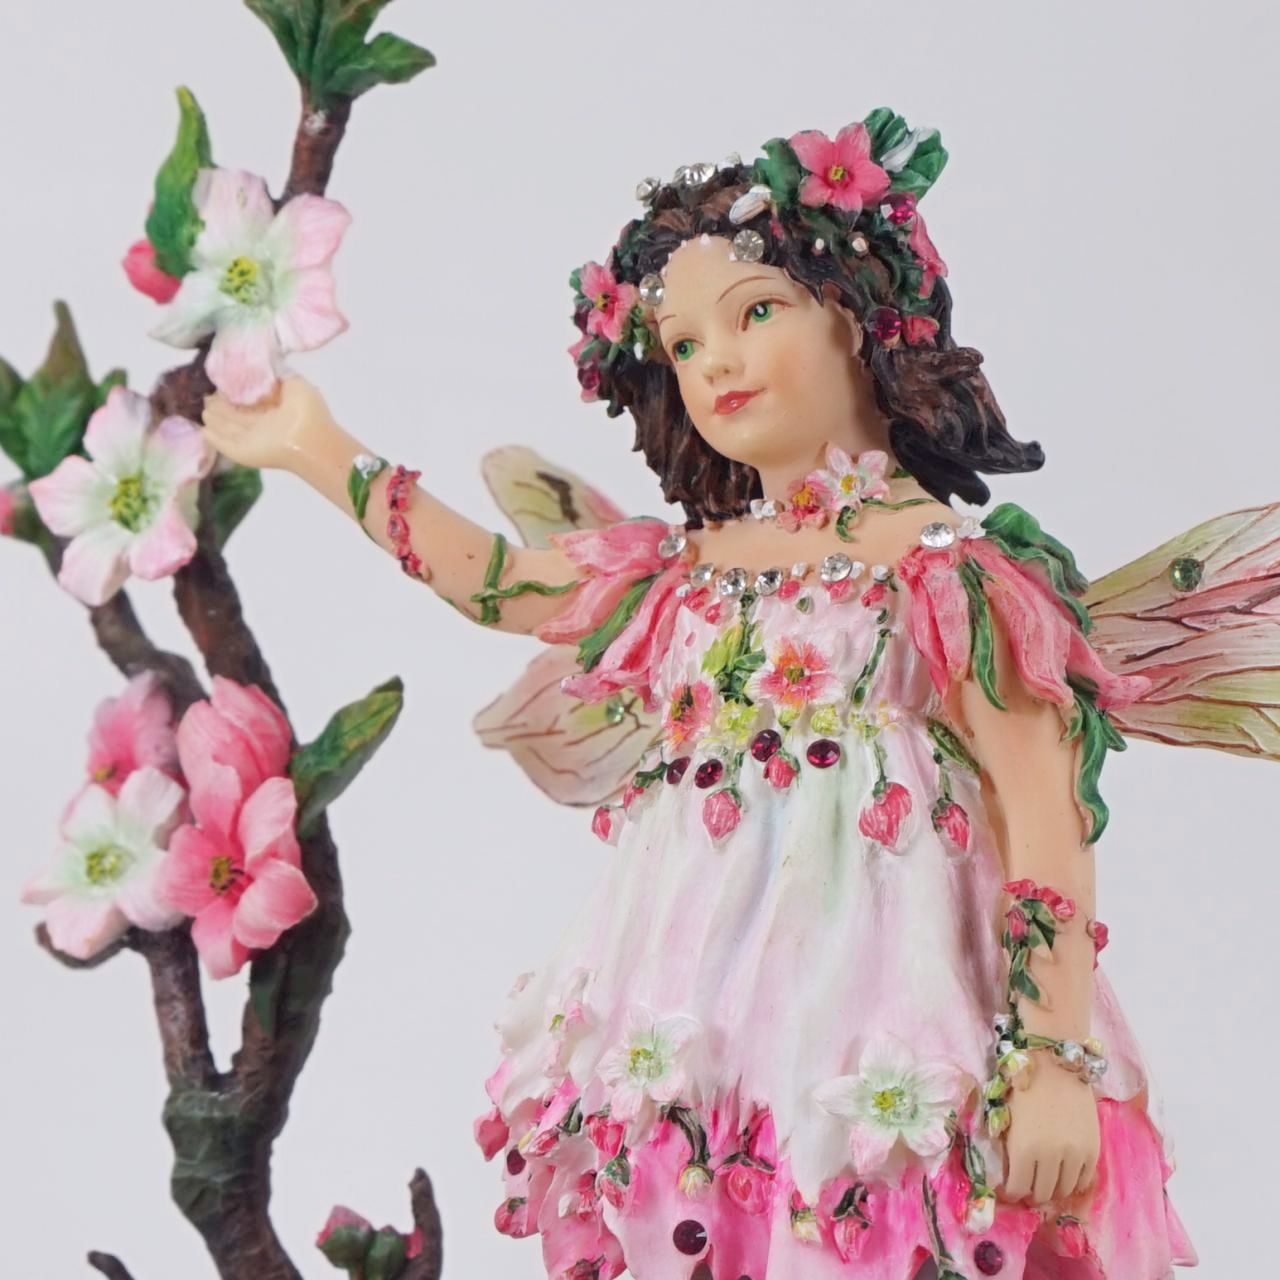 Crisalis Collection★ Cherry Blossom Faerie (1-37) 10% OFF